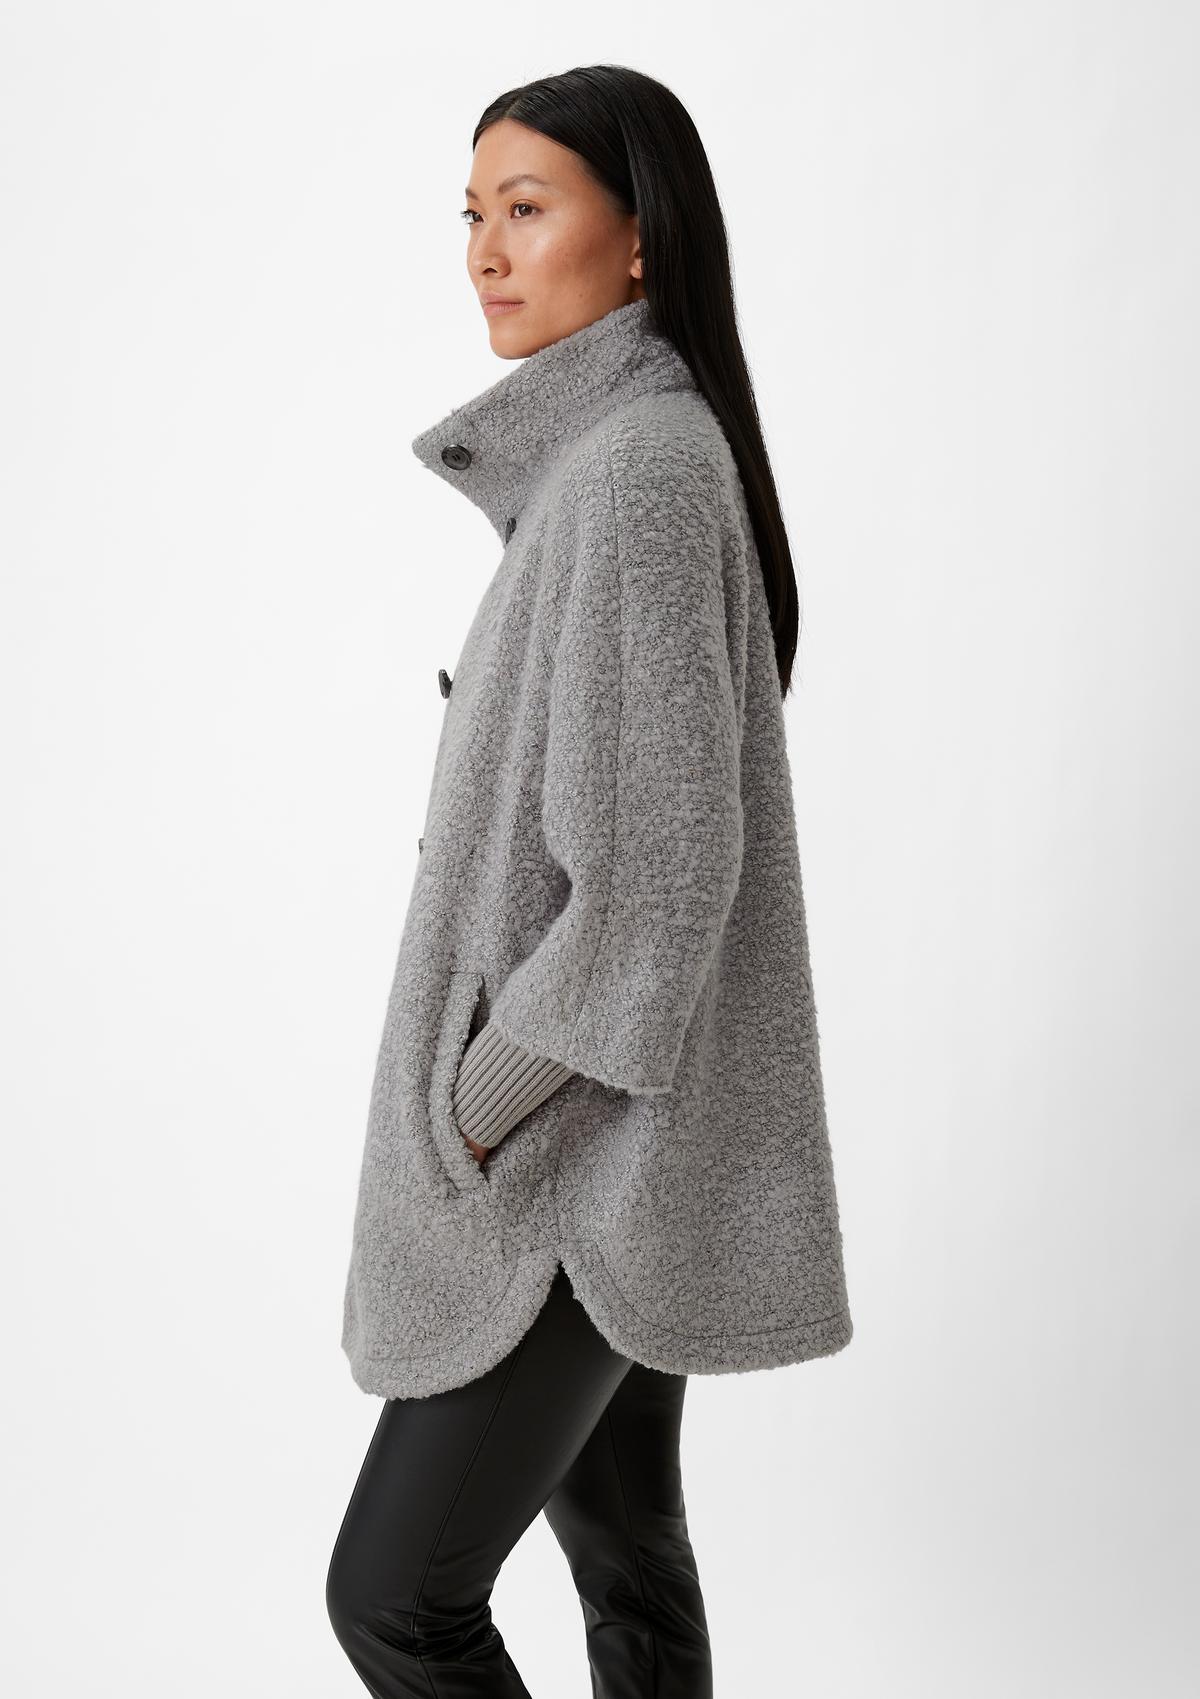 comma Bouclé Jacket in a layering look